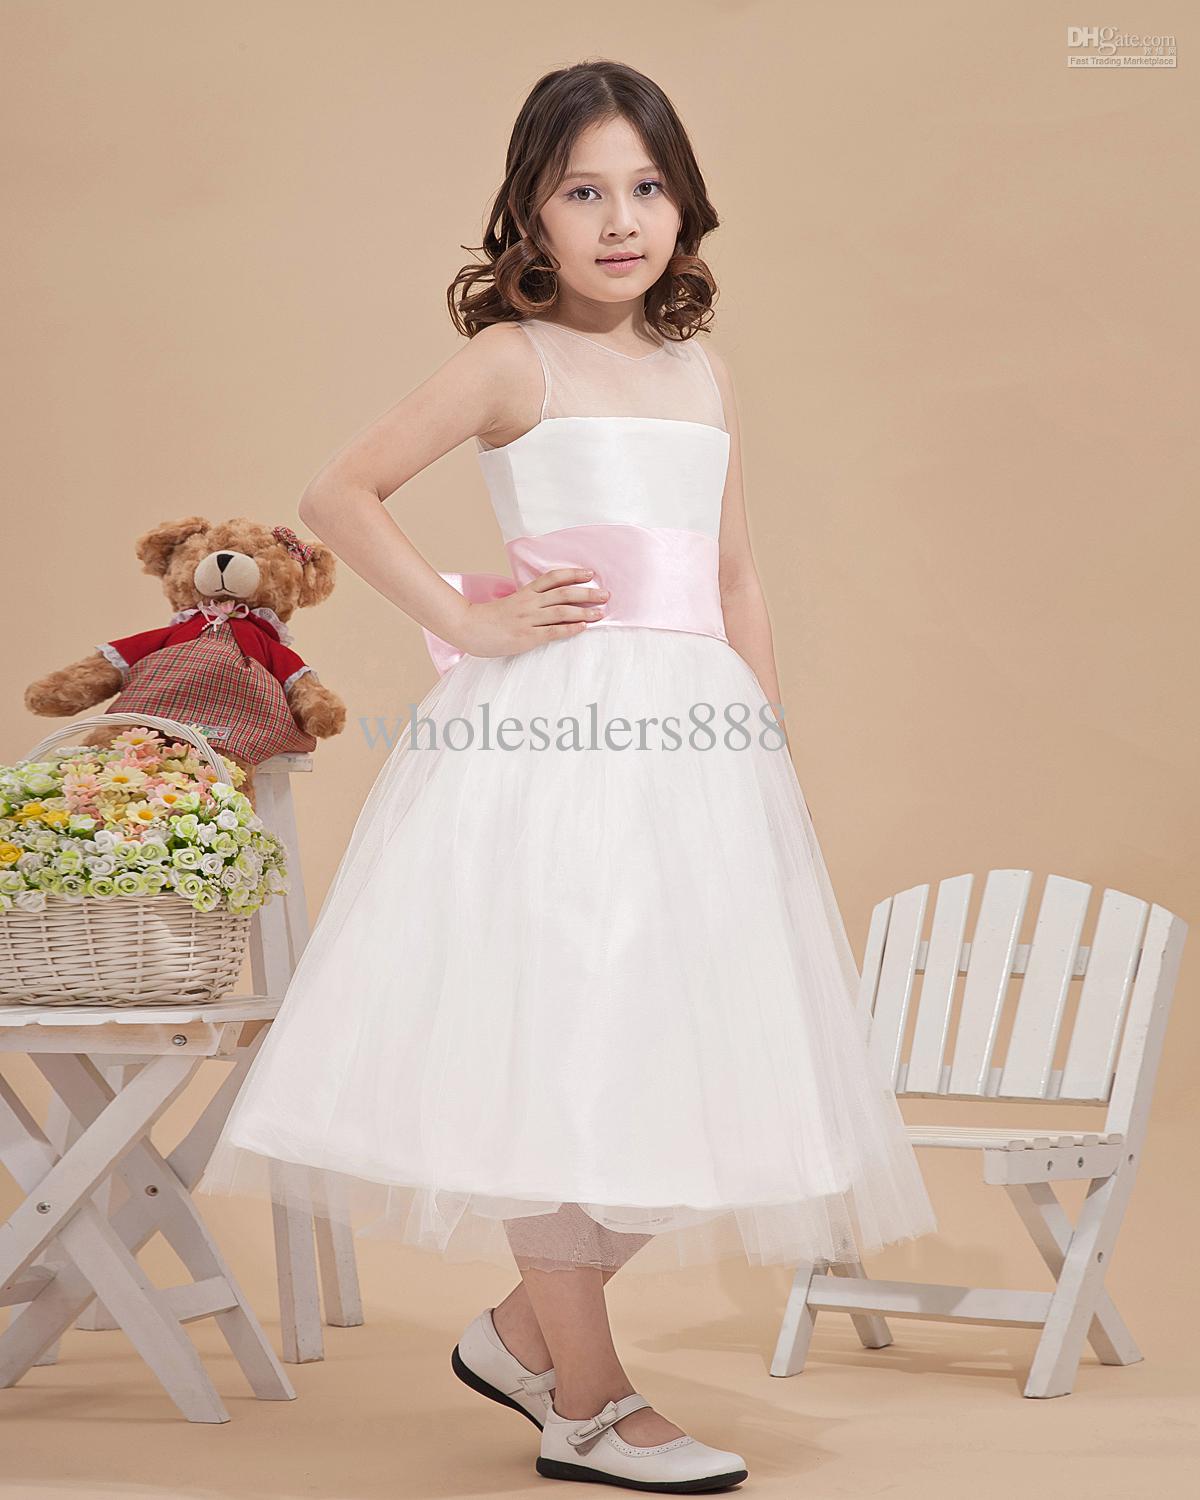 Boys Dressed As Girls Photos : Online Fashion Review